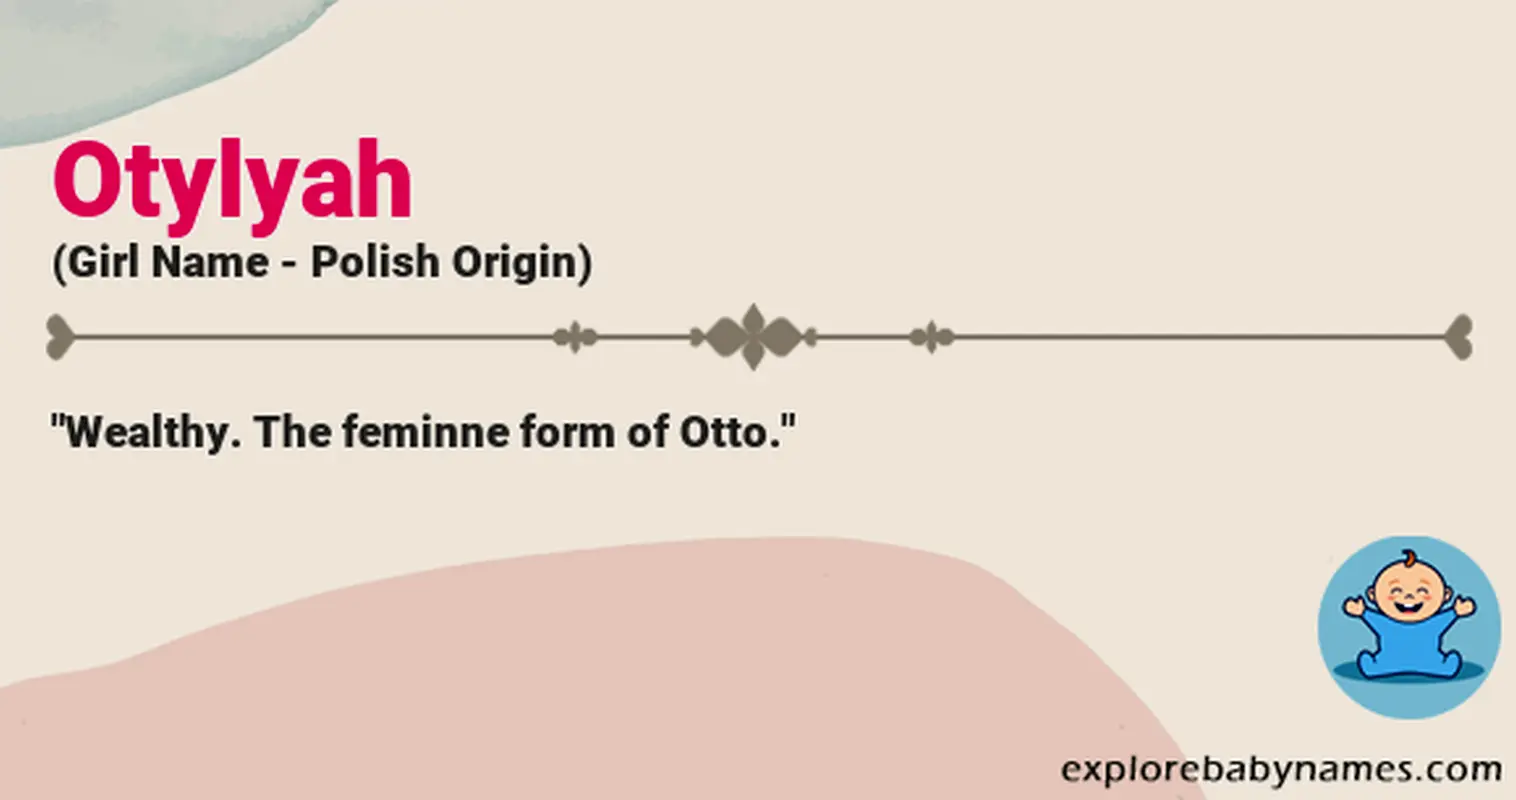 Meaning of Otylyah